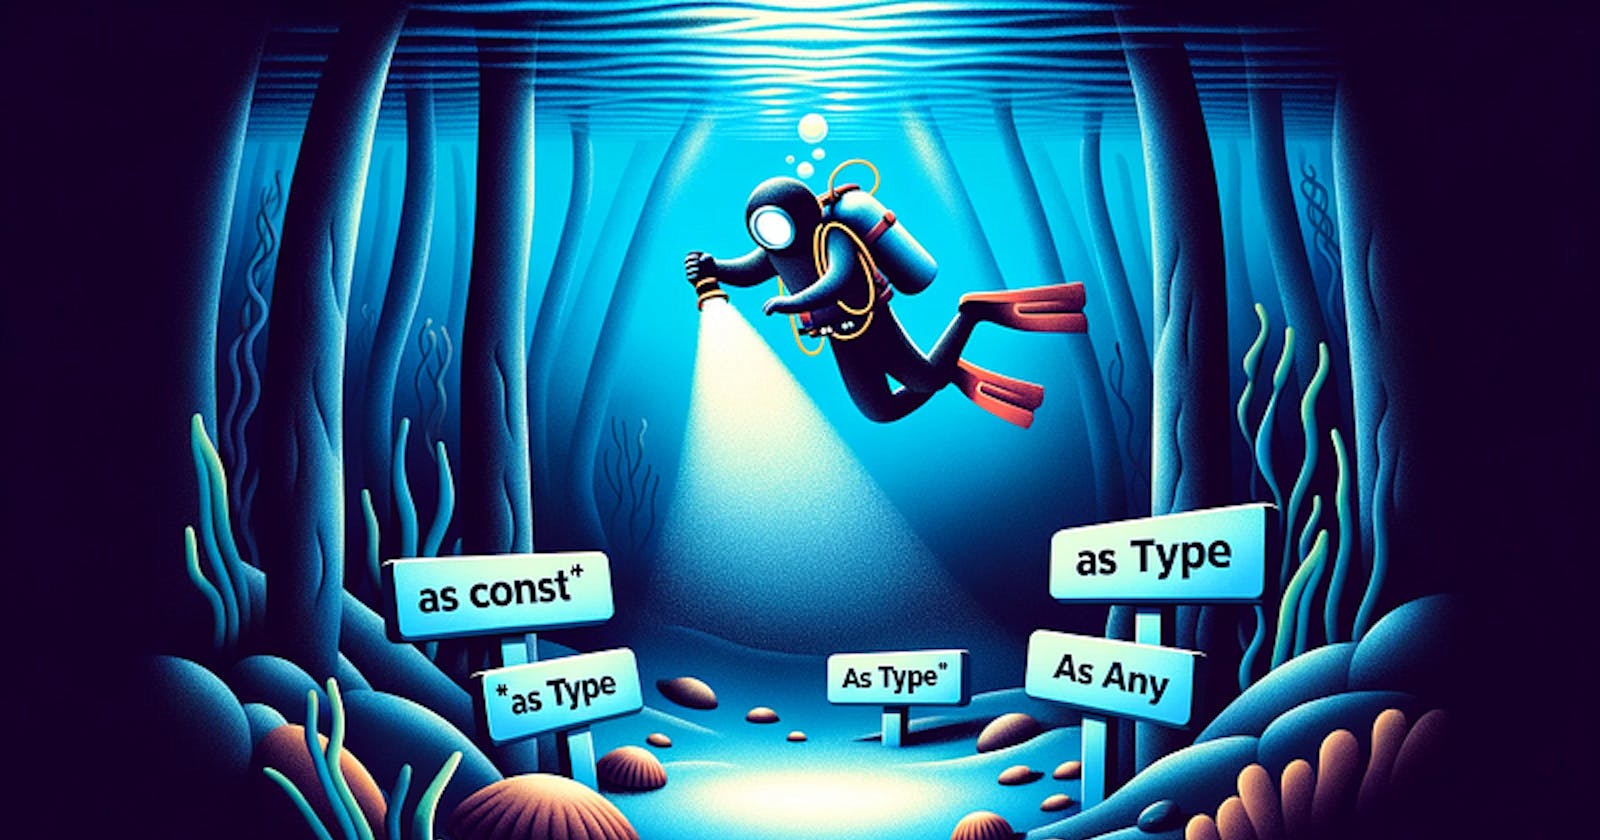 Deep Dive into TypeScript Type Assertions: as const, as [type], and as any